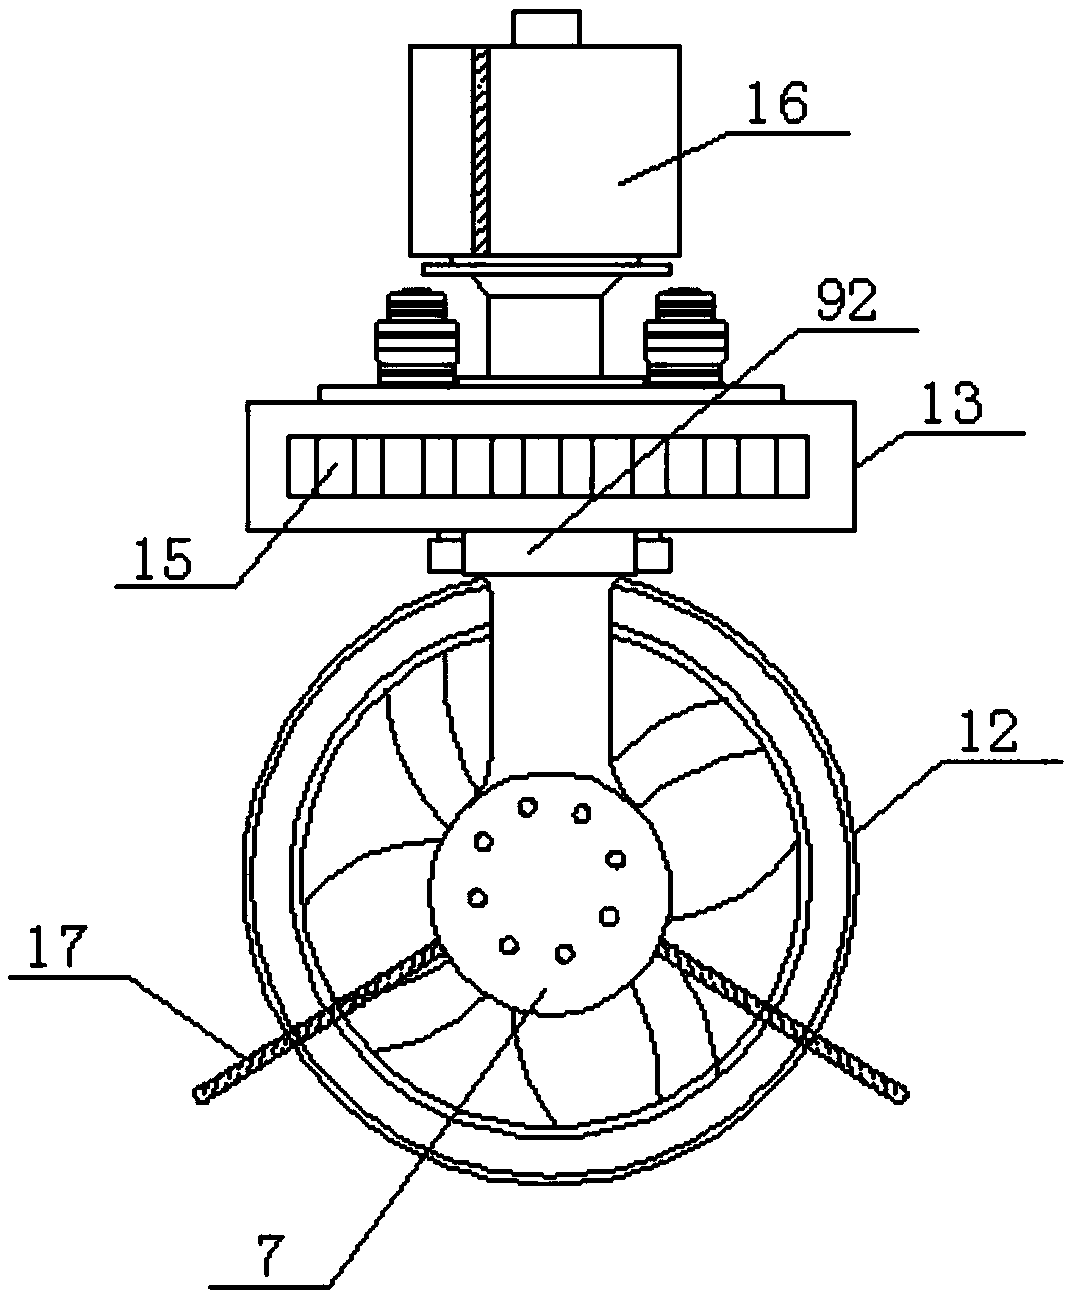 Motor propelling and controlling system applied to yacht